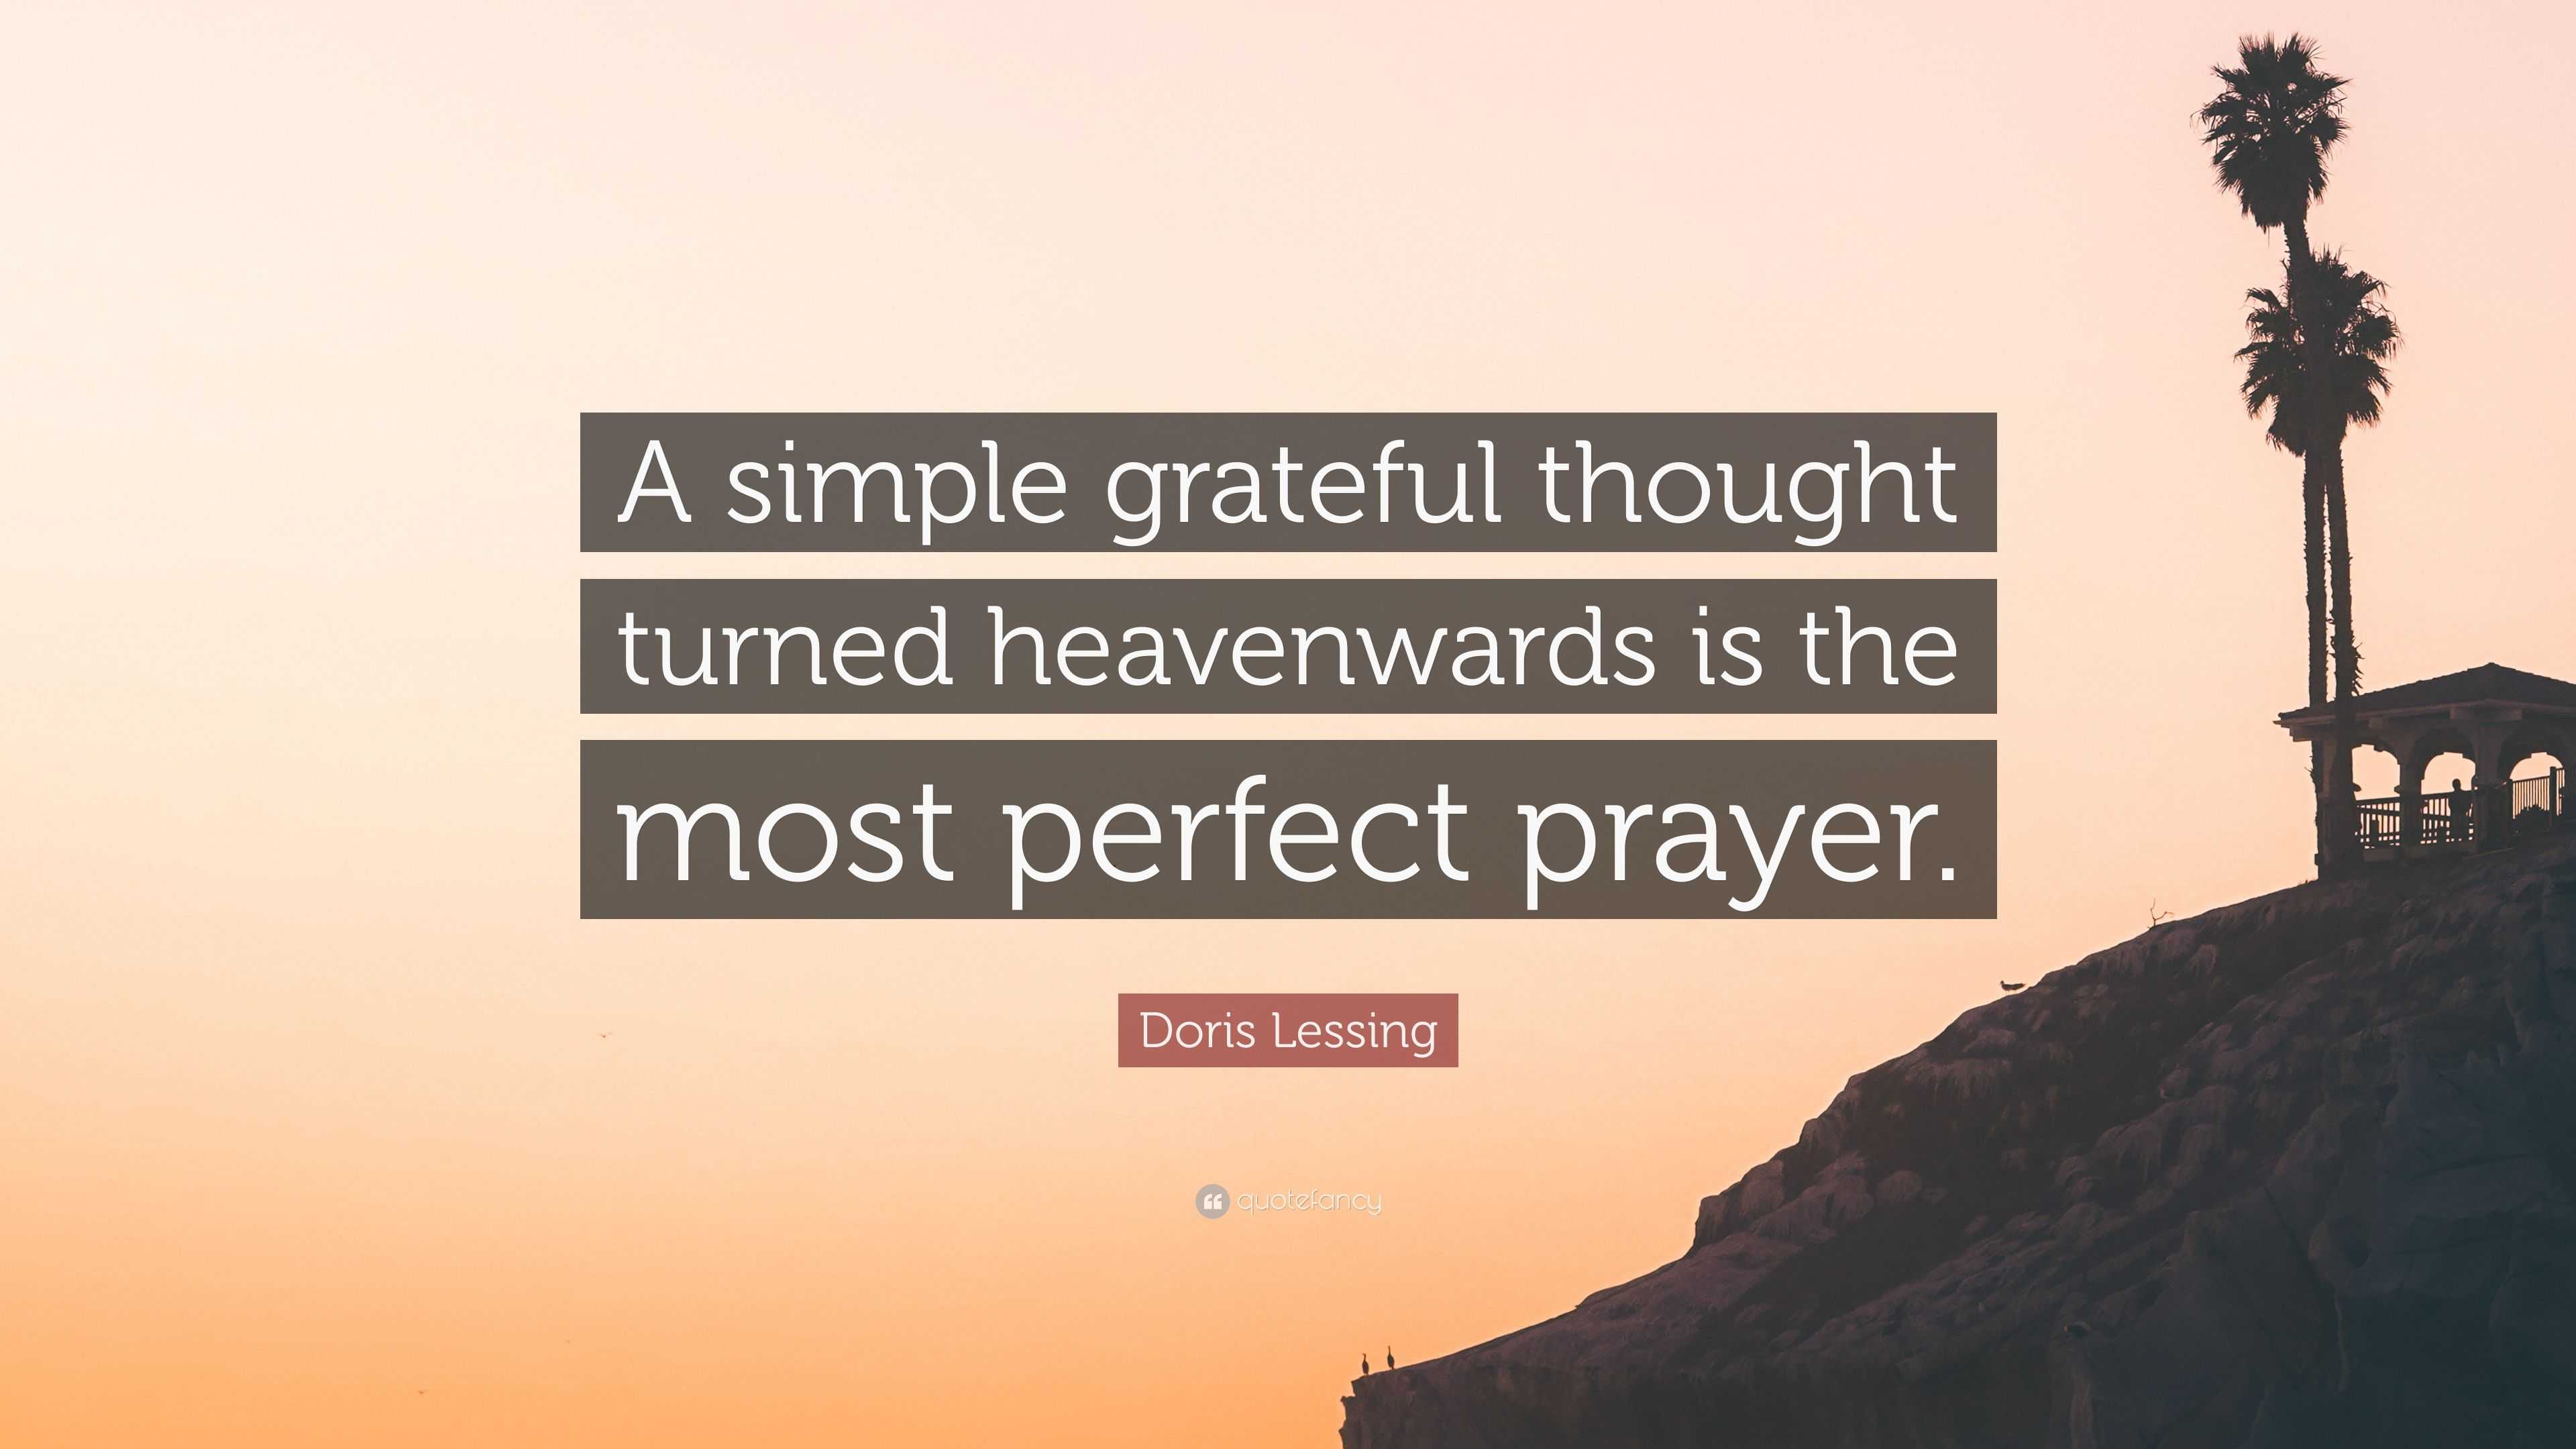 Doris Lessing Quote: “A simple grateful thought turned heavenwards is ...